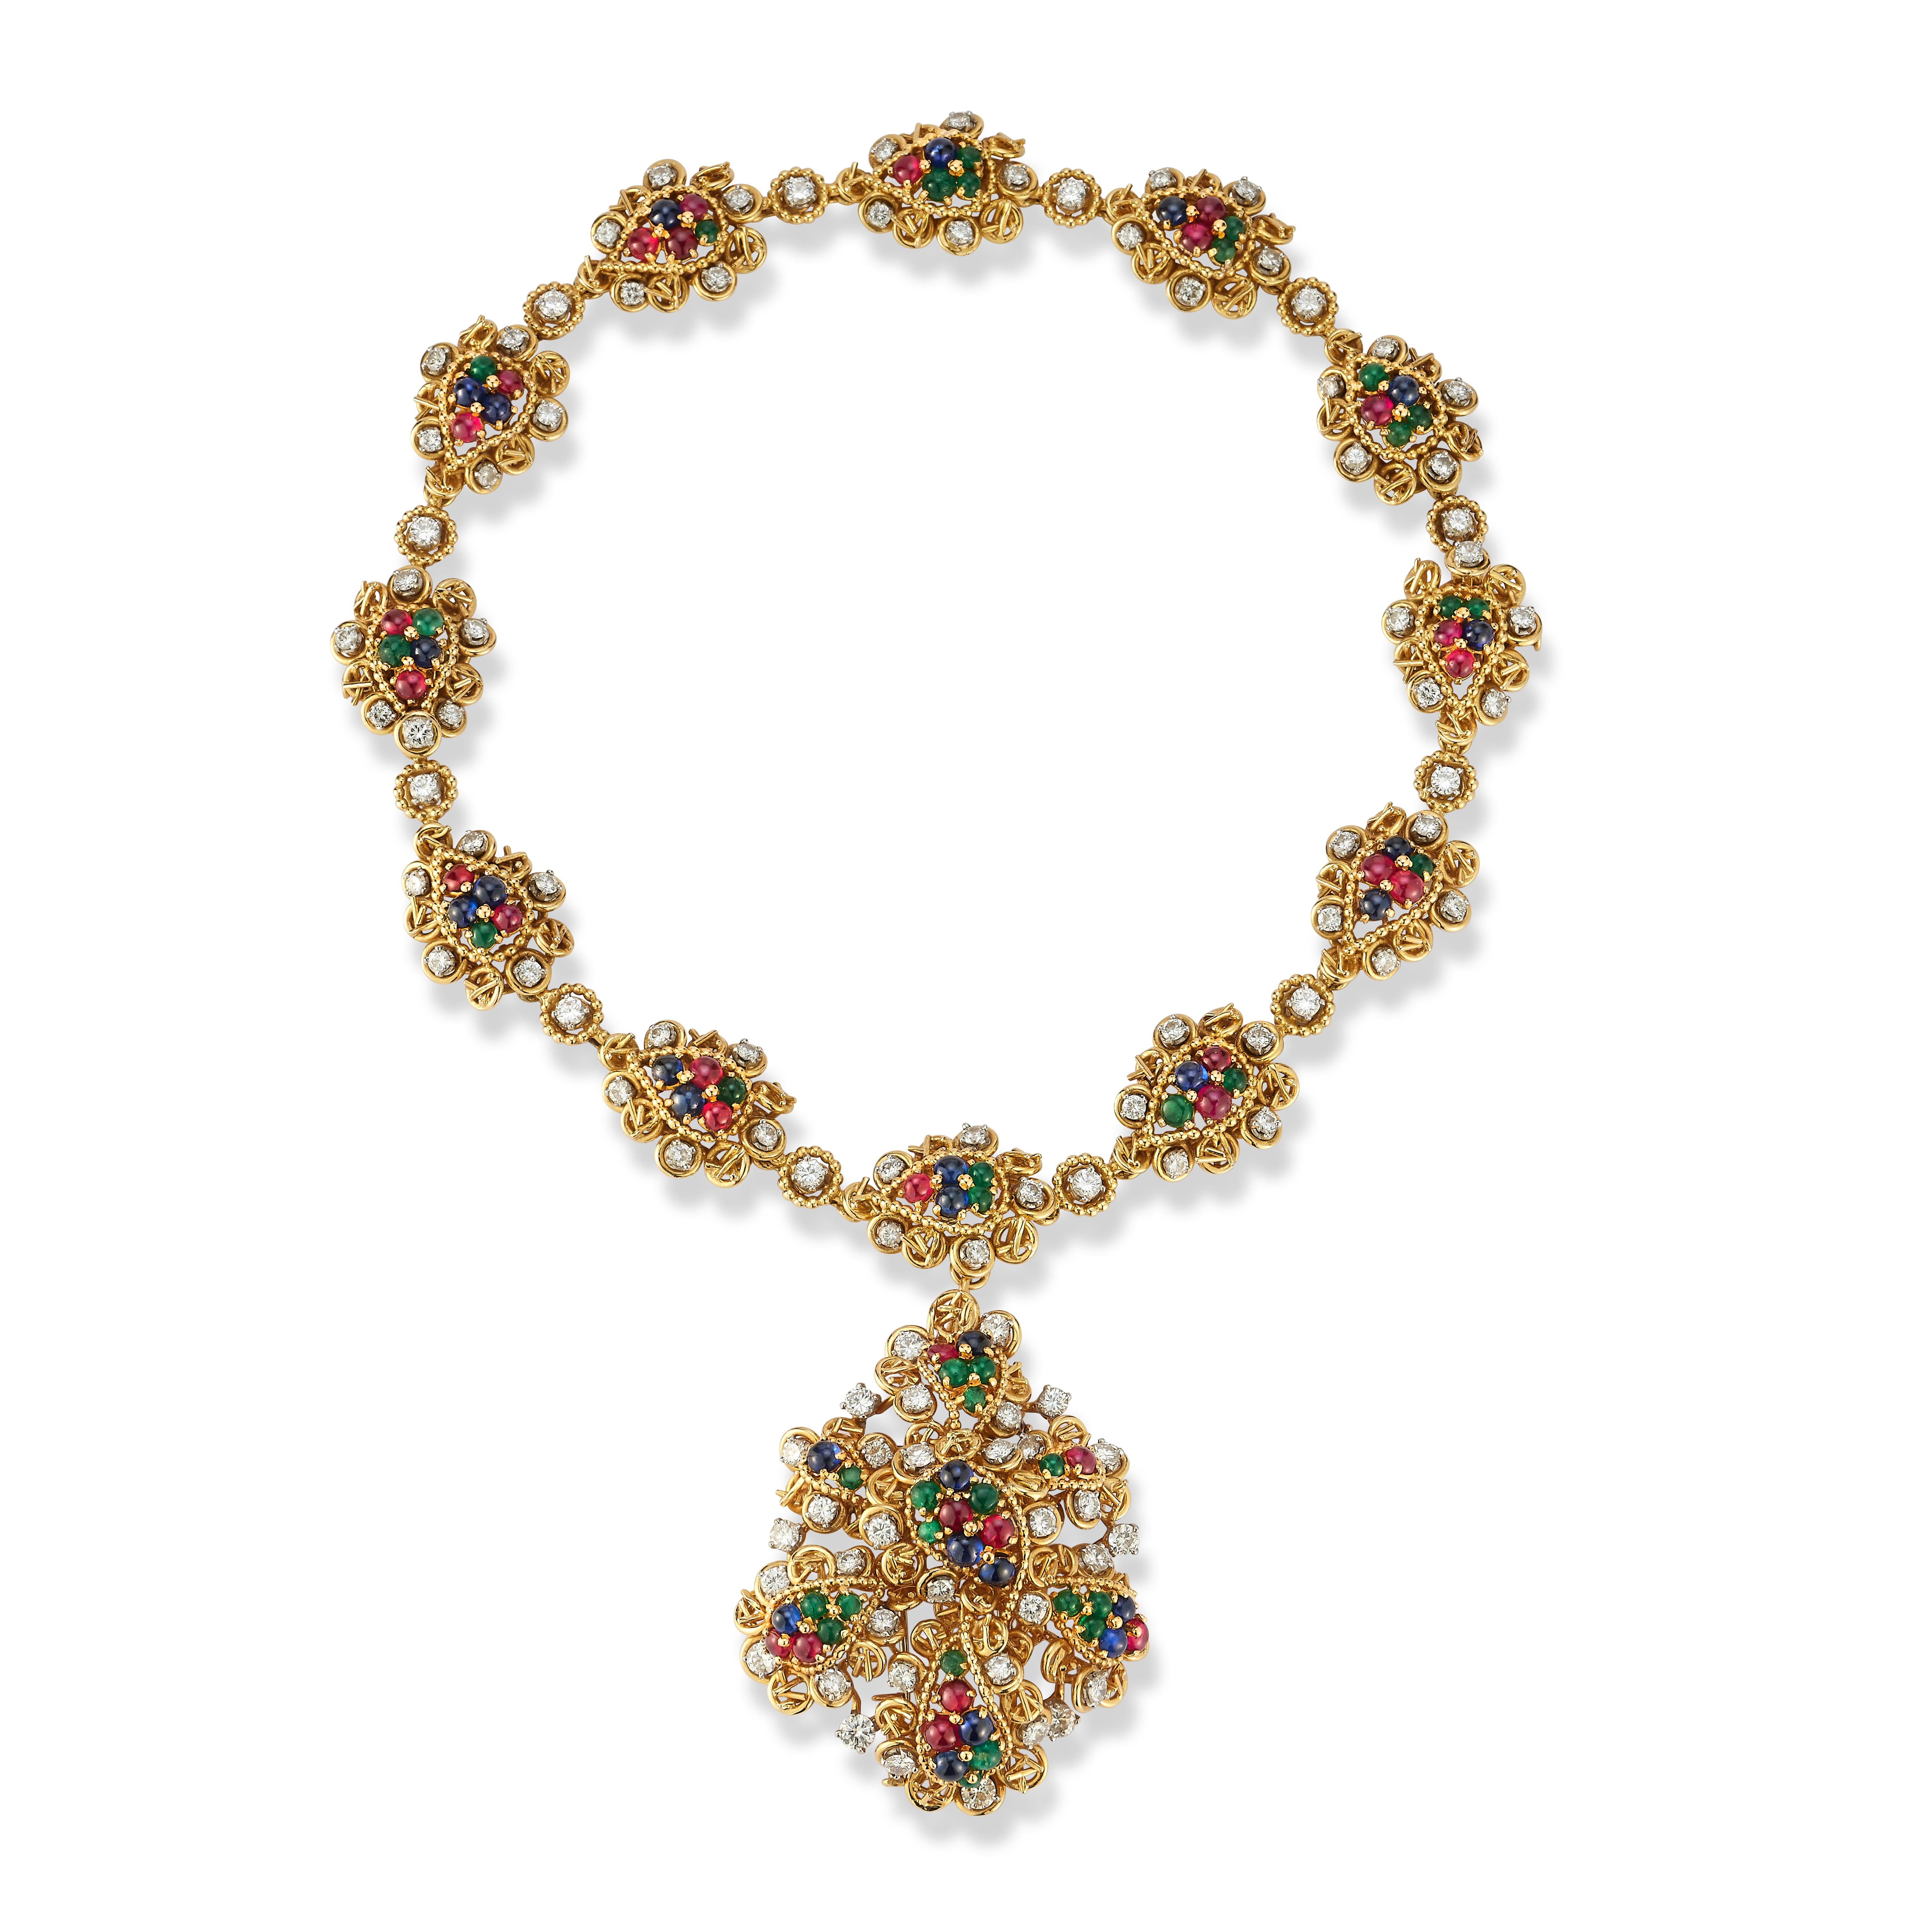 Van Cleef & Arpels Multi Gem Pendant Necklace

An 18-karat yellow gold necklace set with round cut diamonds, cabochon rubies, cabochon sapphires, and cabochon emeralds. The pendant can be removed and worn separately as a brooch and the necklace